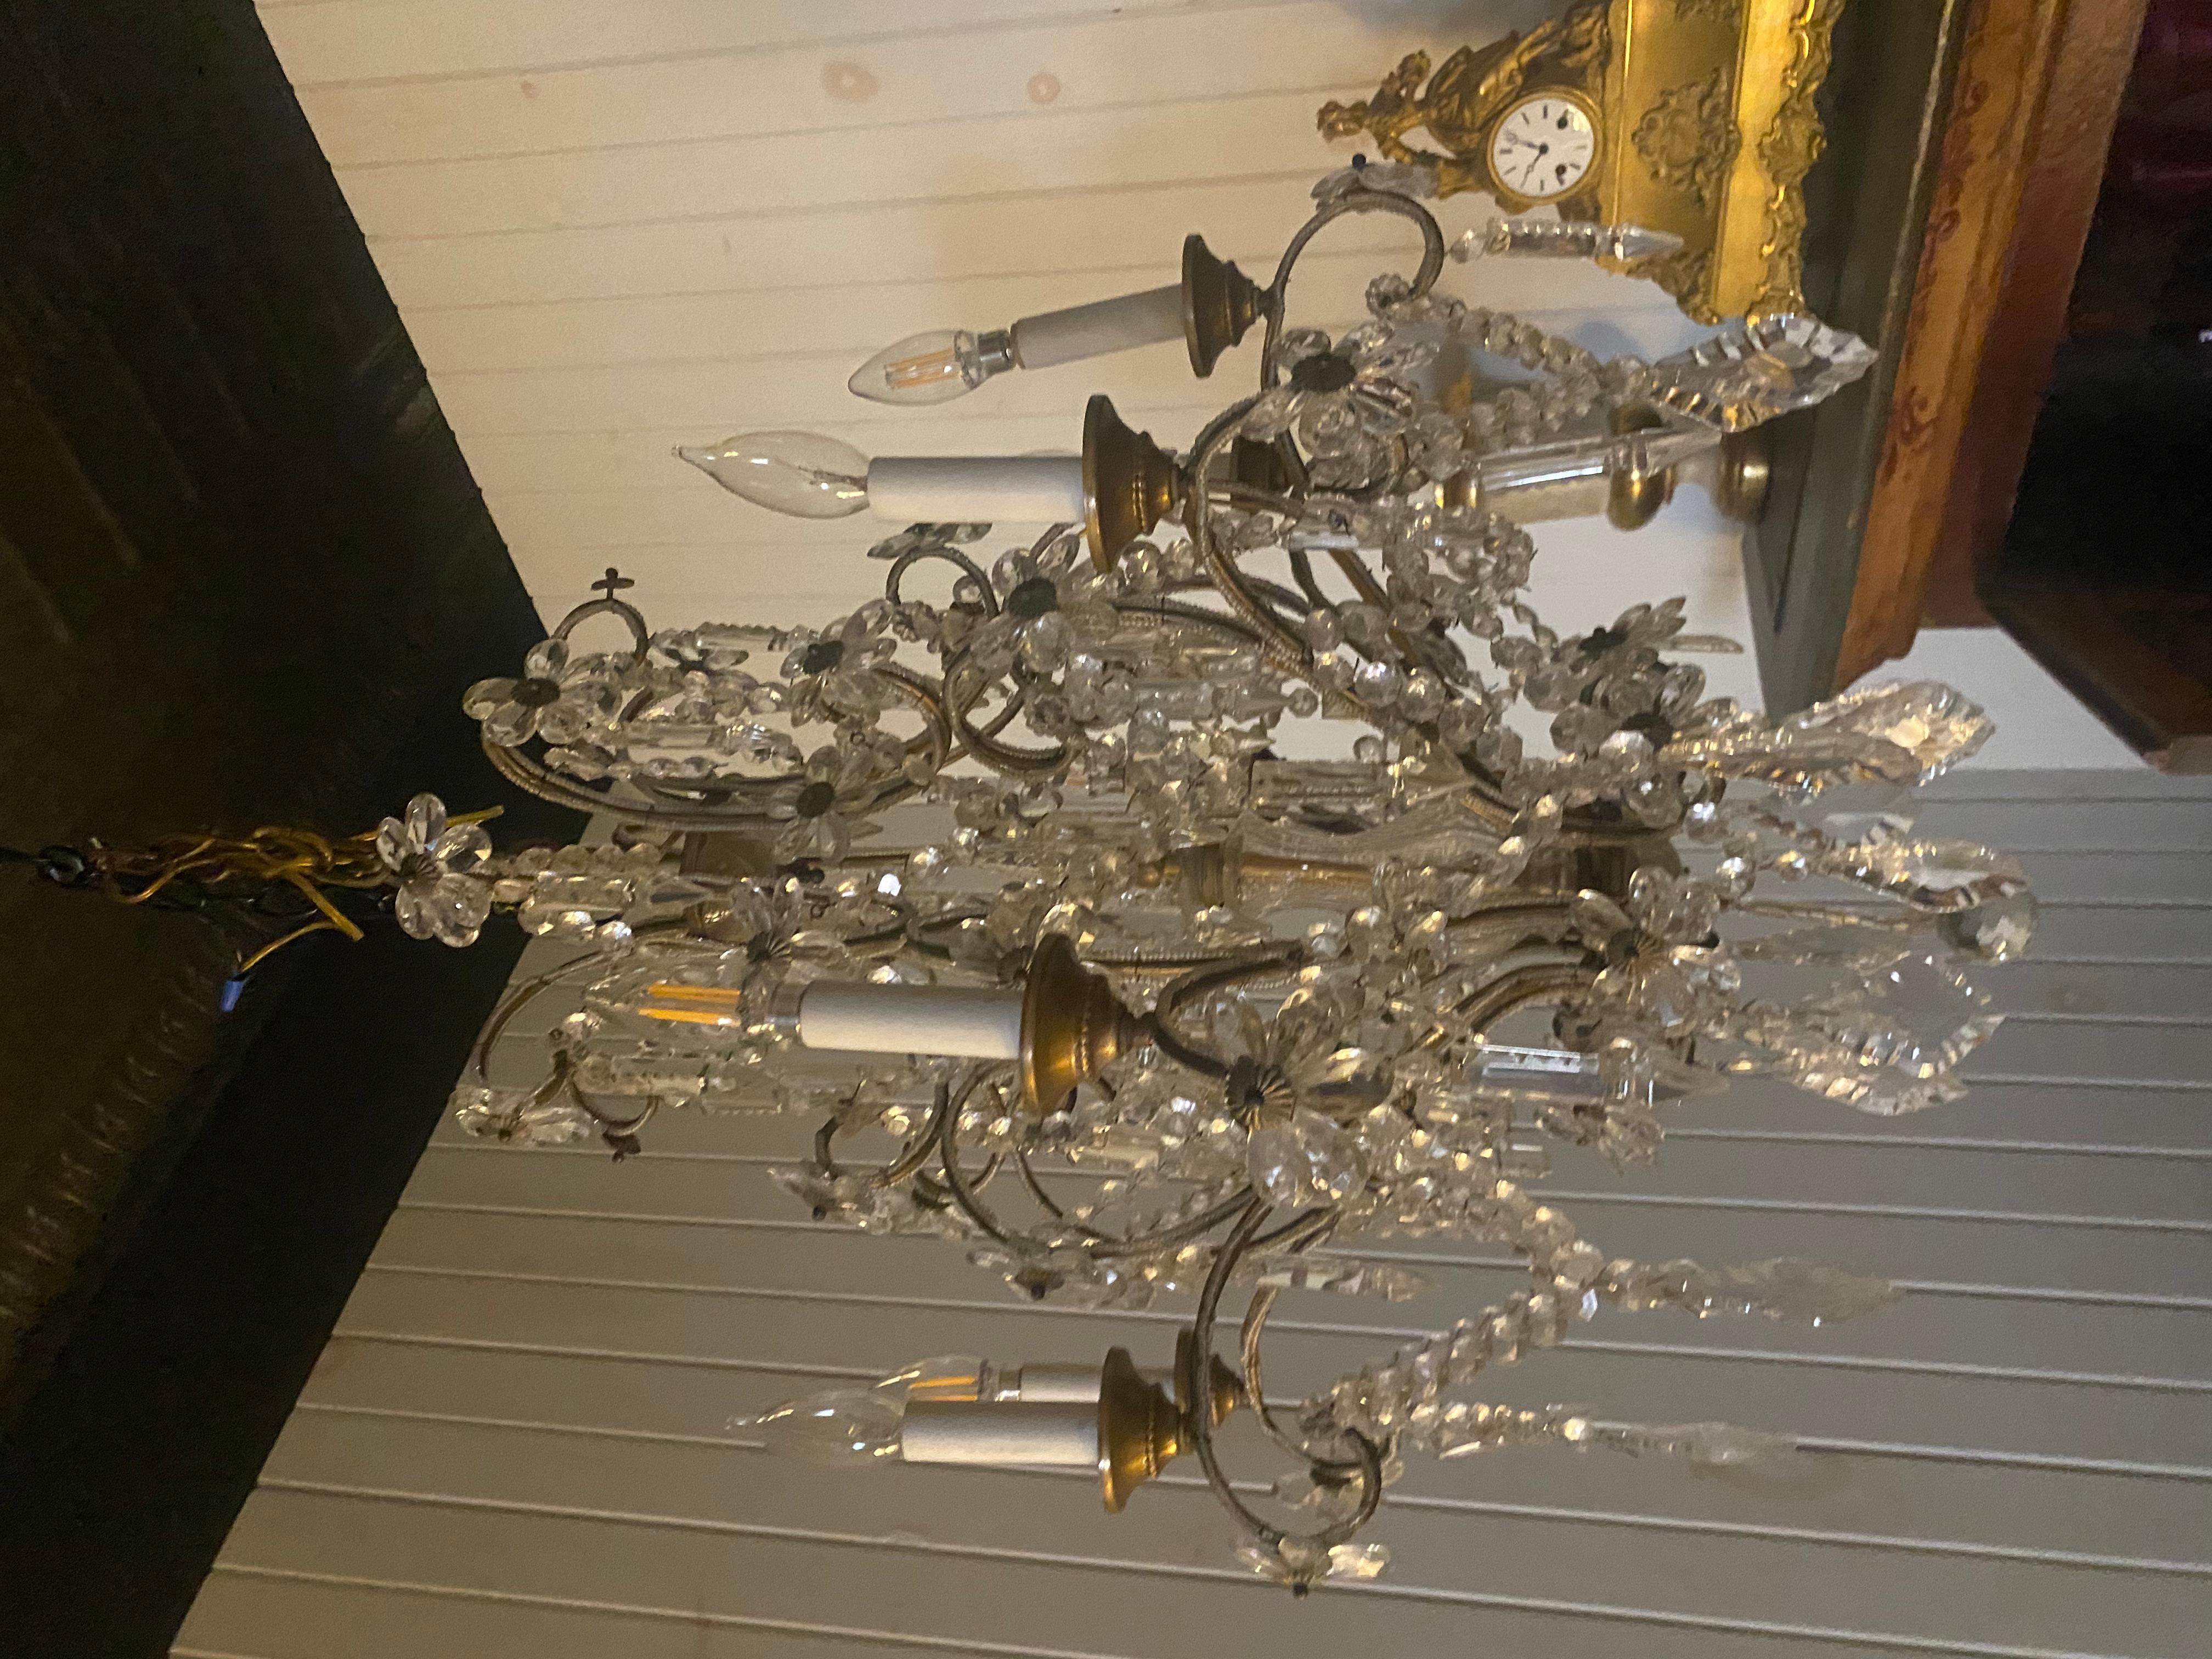 Eight Arm Chystal Chandelier In The Style Of Maison Bagues, Nice Scale.  Photo's don't do it justice.